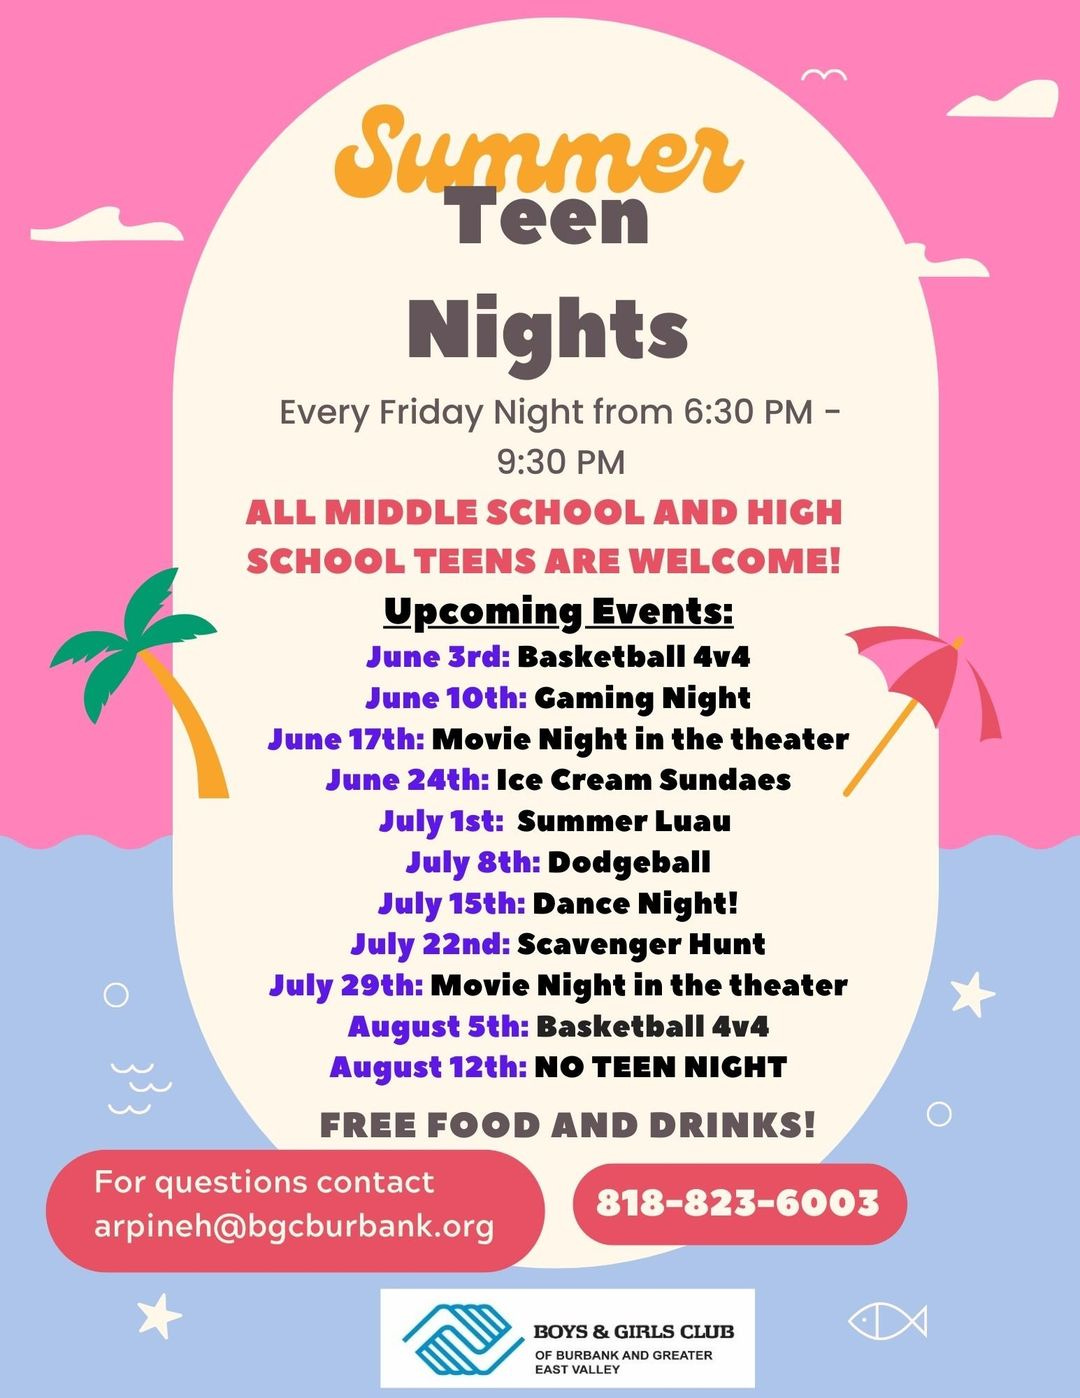 May be an image of text that says 'Summer Teen Nights Every Friday Night from 6:30 PM- 9:30 PM ALL MIDDLE SCHOOL AND HIGH SCHOOL TEENS ARE WELCOME! Upcoming Events: June 3rd: Basketball 4v4 June 10th: Gaming Night June 17th: Movie Night in the theater June 24th: Ice Cream Sundaes July 1st: Summer Luau July 8th: Dodgeball July 15th: Dance Night! July 22nd: Scavenger Hunt July 29th: Movie Night in the theater August 5th: Basketball 4v4 August 12th: NO TEEN NIGHT FREE FOOD AND DRINKS! For questions contact arpineh@bgcburbank.org 818-823-6003 BOYS & GIRLS CLUB AND GREATER EAST VALLEY'